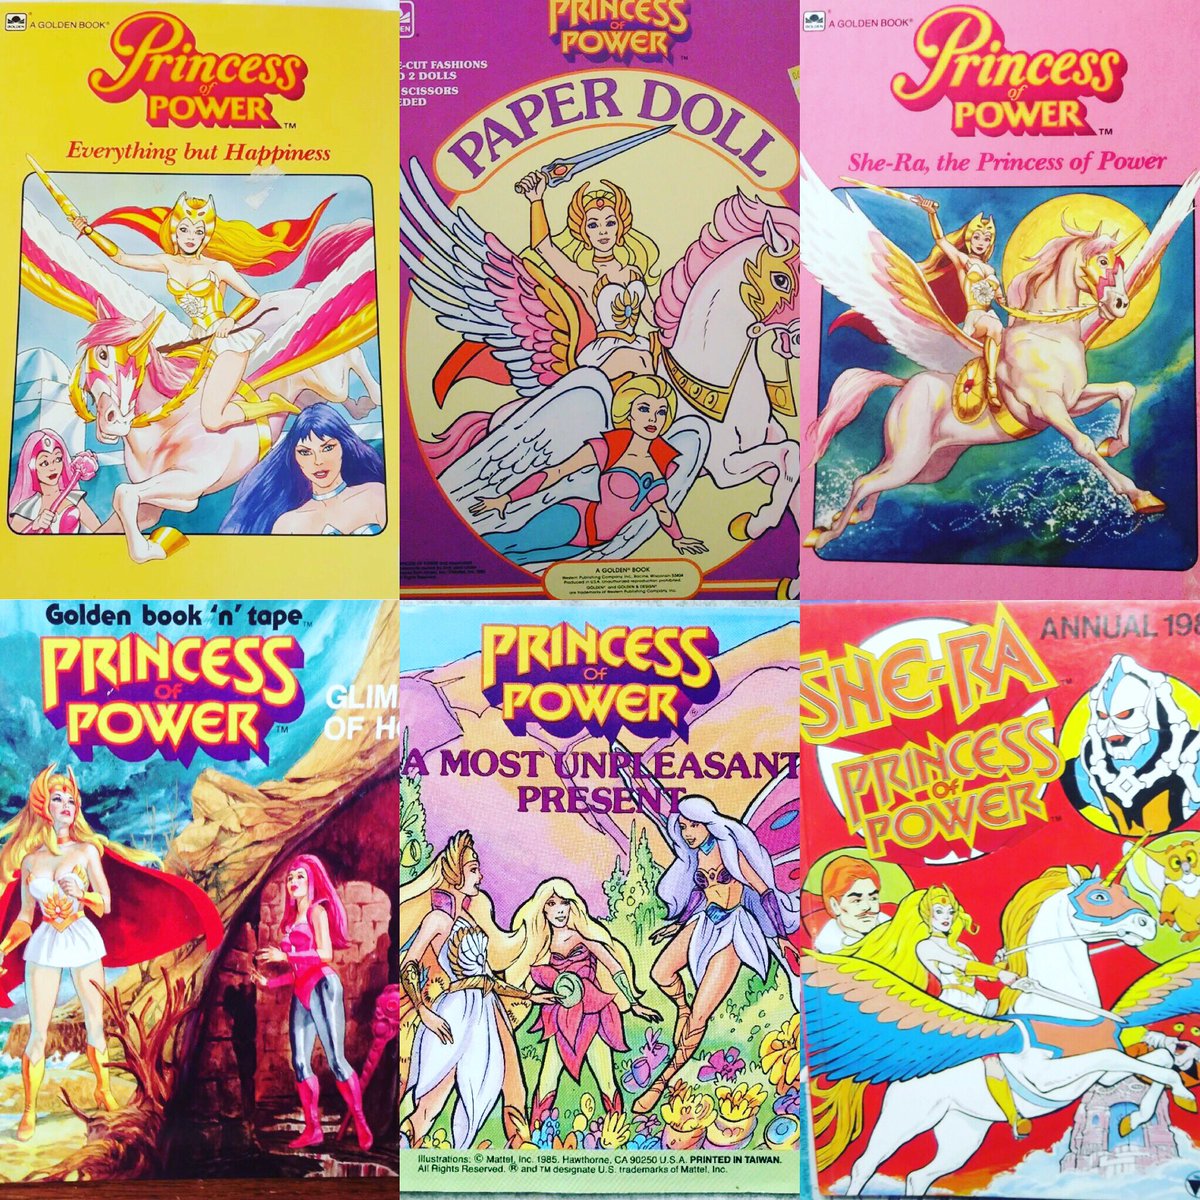 80s BOOKS of the Day:  Princess of Power

To find out how you can be a part of 1980s History, Visit:
Patreon.com/80sThen80sNow

#PrincessOfPower #SheRa #MOTU #Cartoons #Books #Book #Reading #Readers #Read #Coloring #Animation #SciFi #Throwback